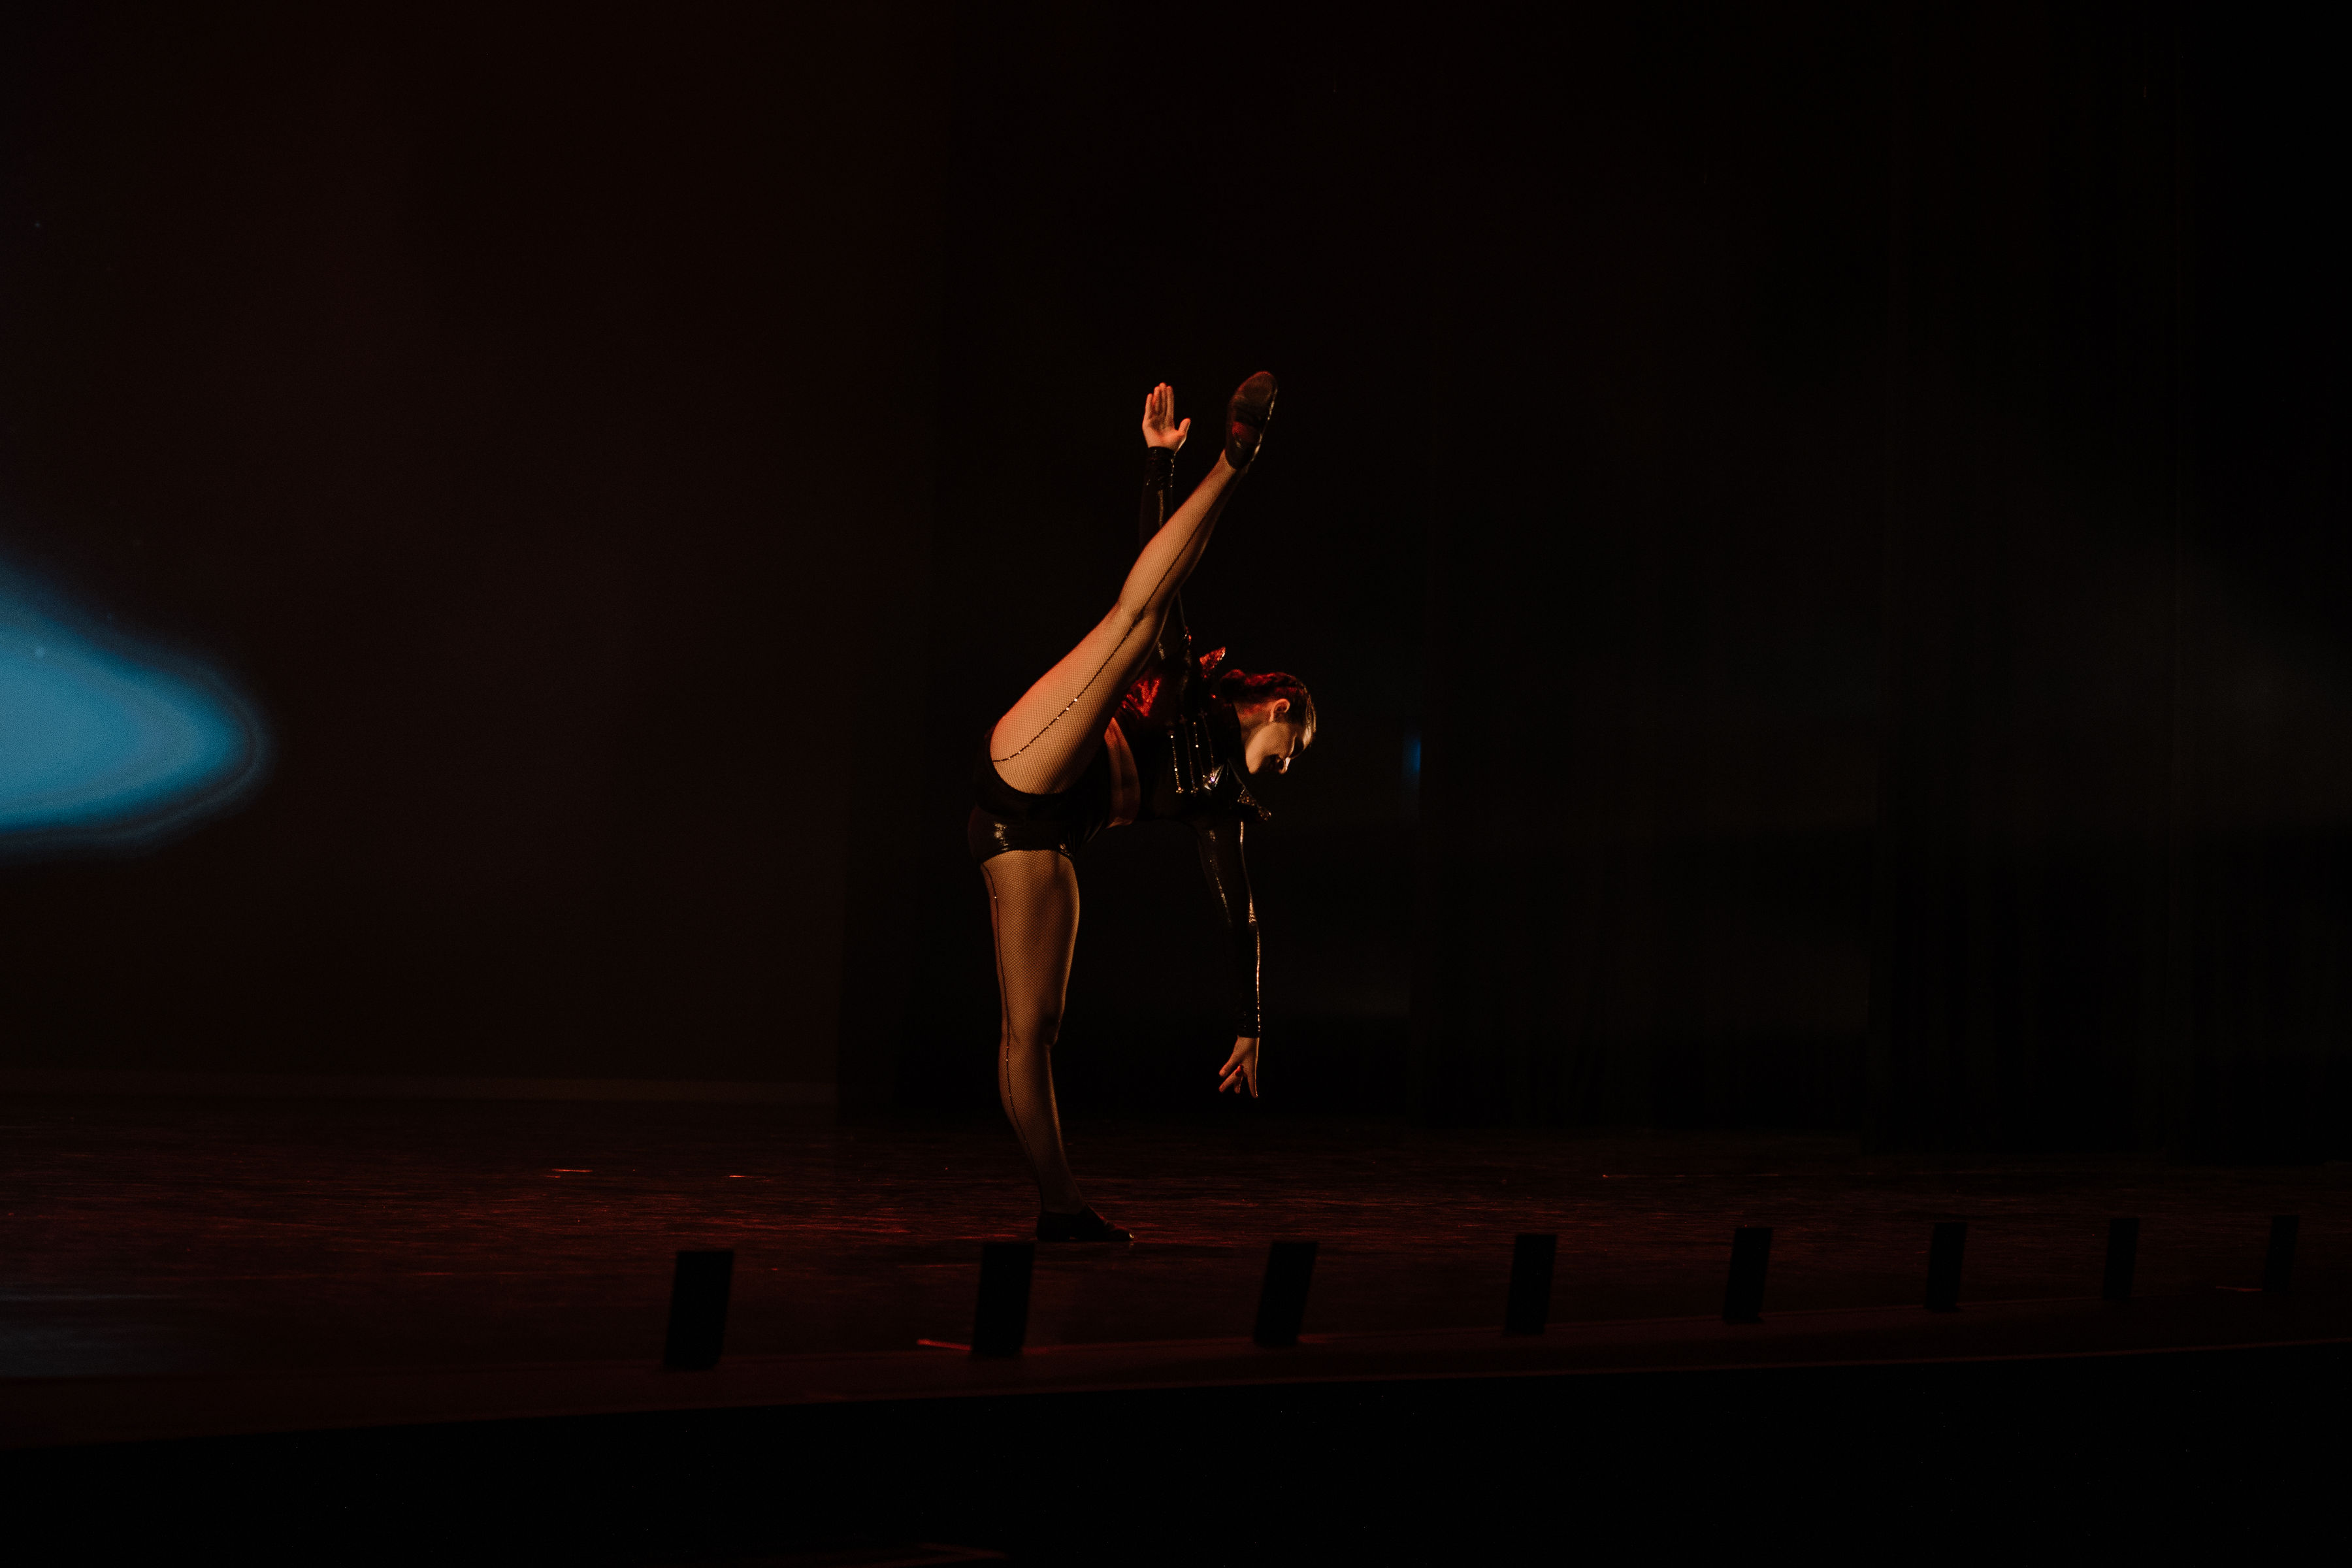 Dancer performing jazz solo on stage